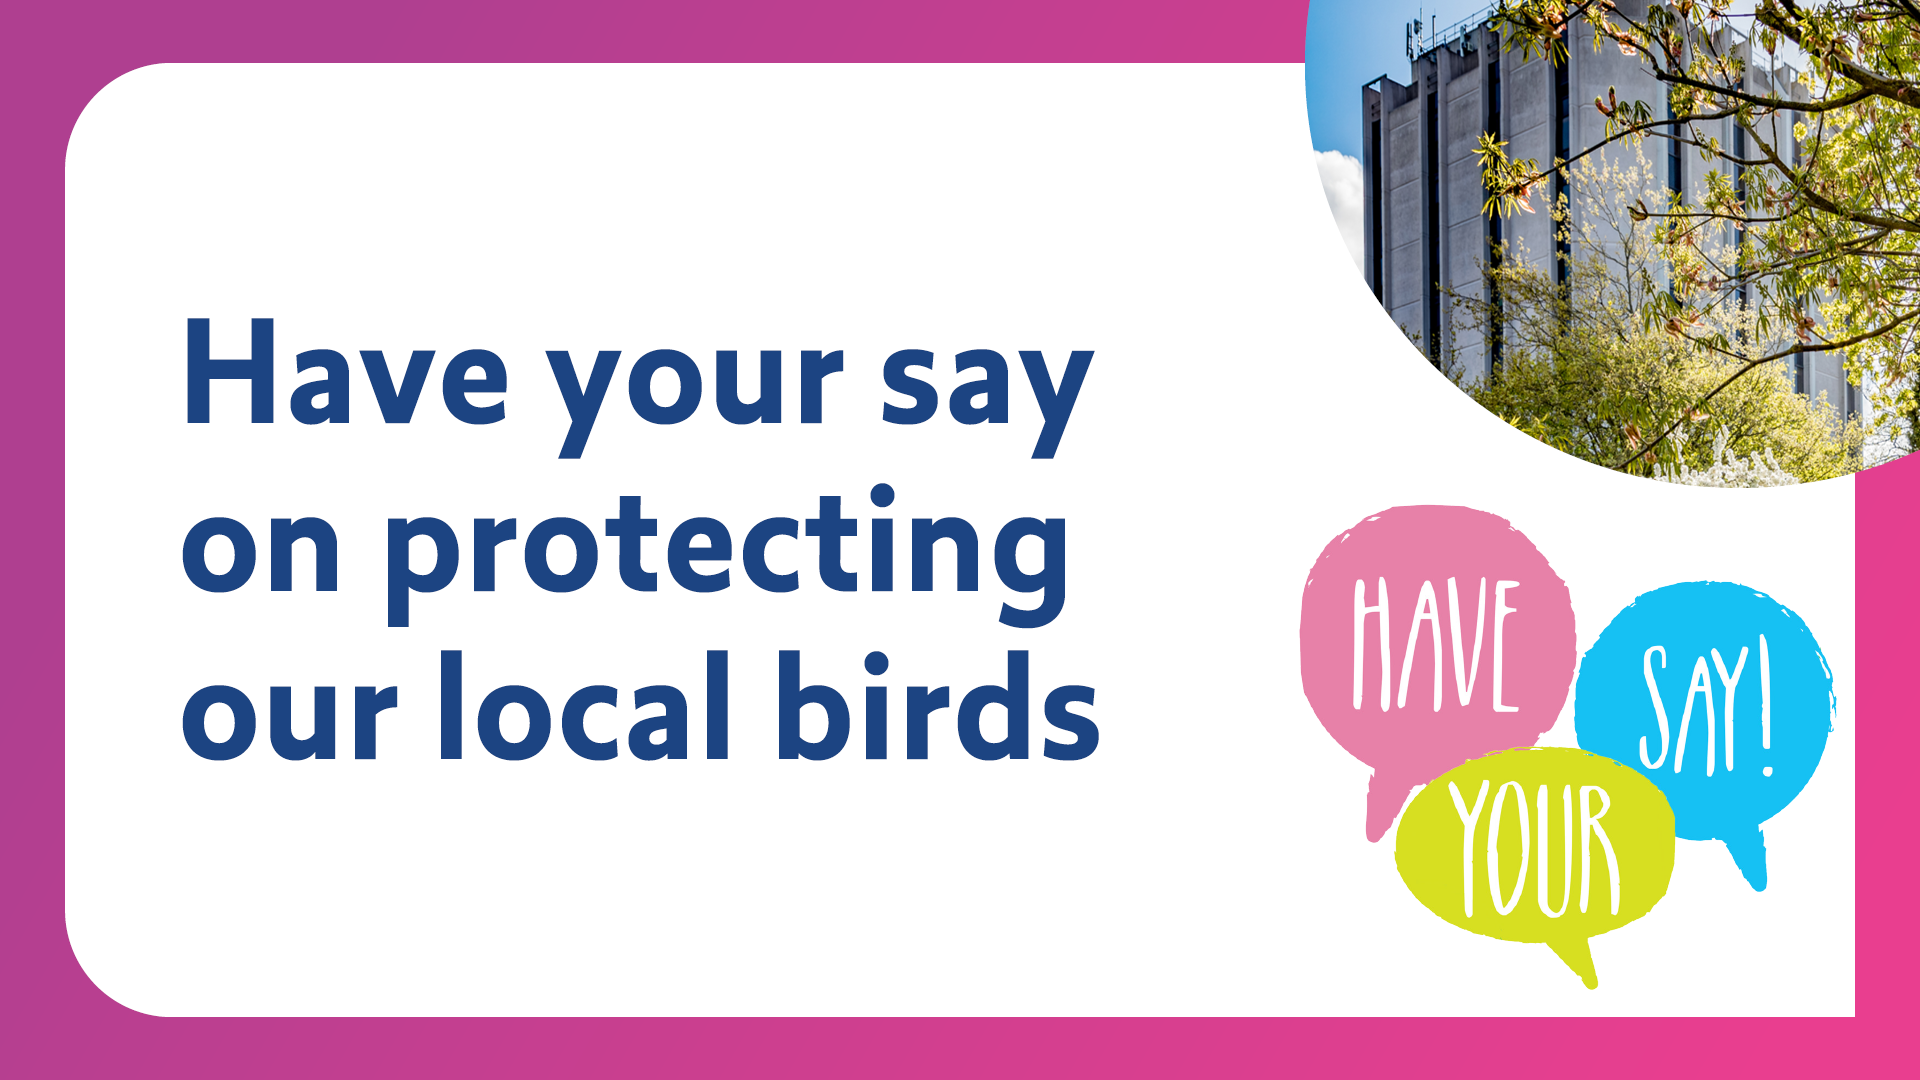 Have your say on protecting our local birds